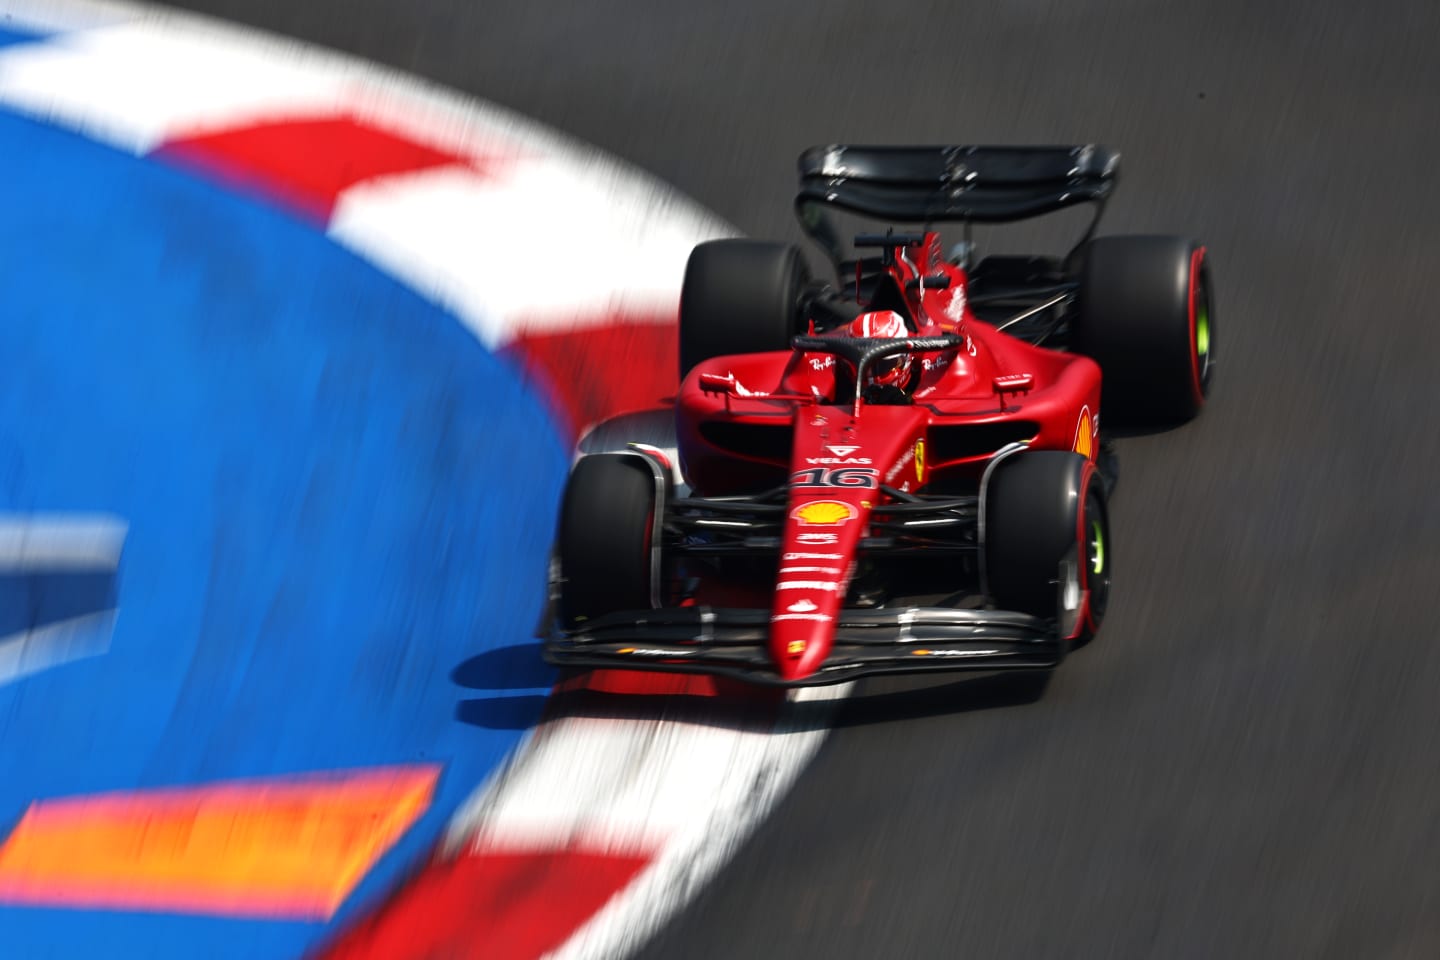 MEXICO CITY, MEXICO - OCTOBER 29: Charles Leclerc of Monaco driving the (16) Ferrari F1-75 on track during final practice ahead of the F1 Grand Prix of Mexico at Autodromo Hermanos Rodriguez on October 29, 2022 in Mexico City, Mexico. (Photo by Mark Thompson/Getty Images )